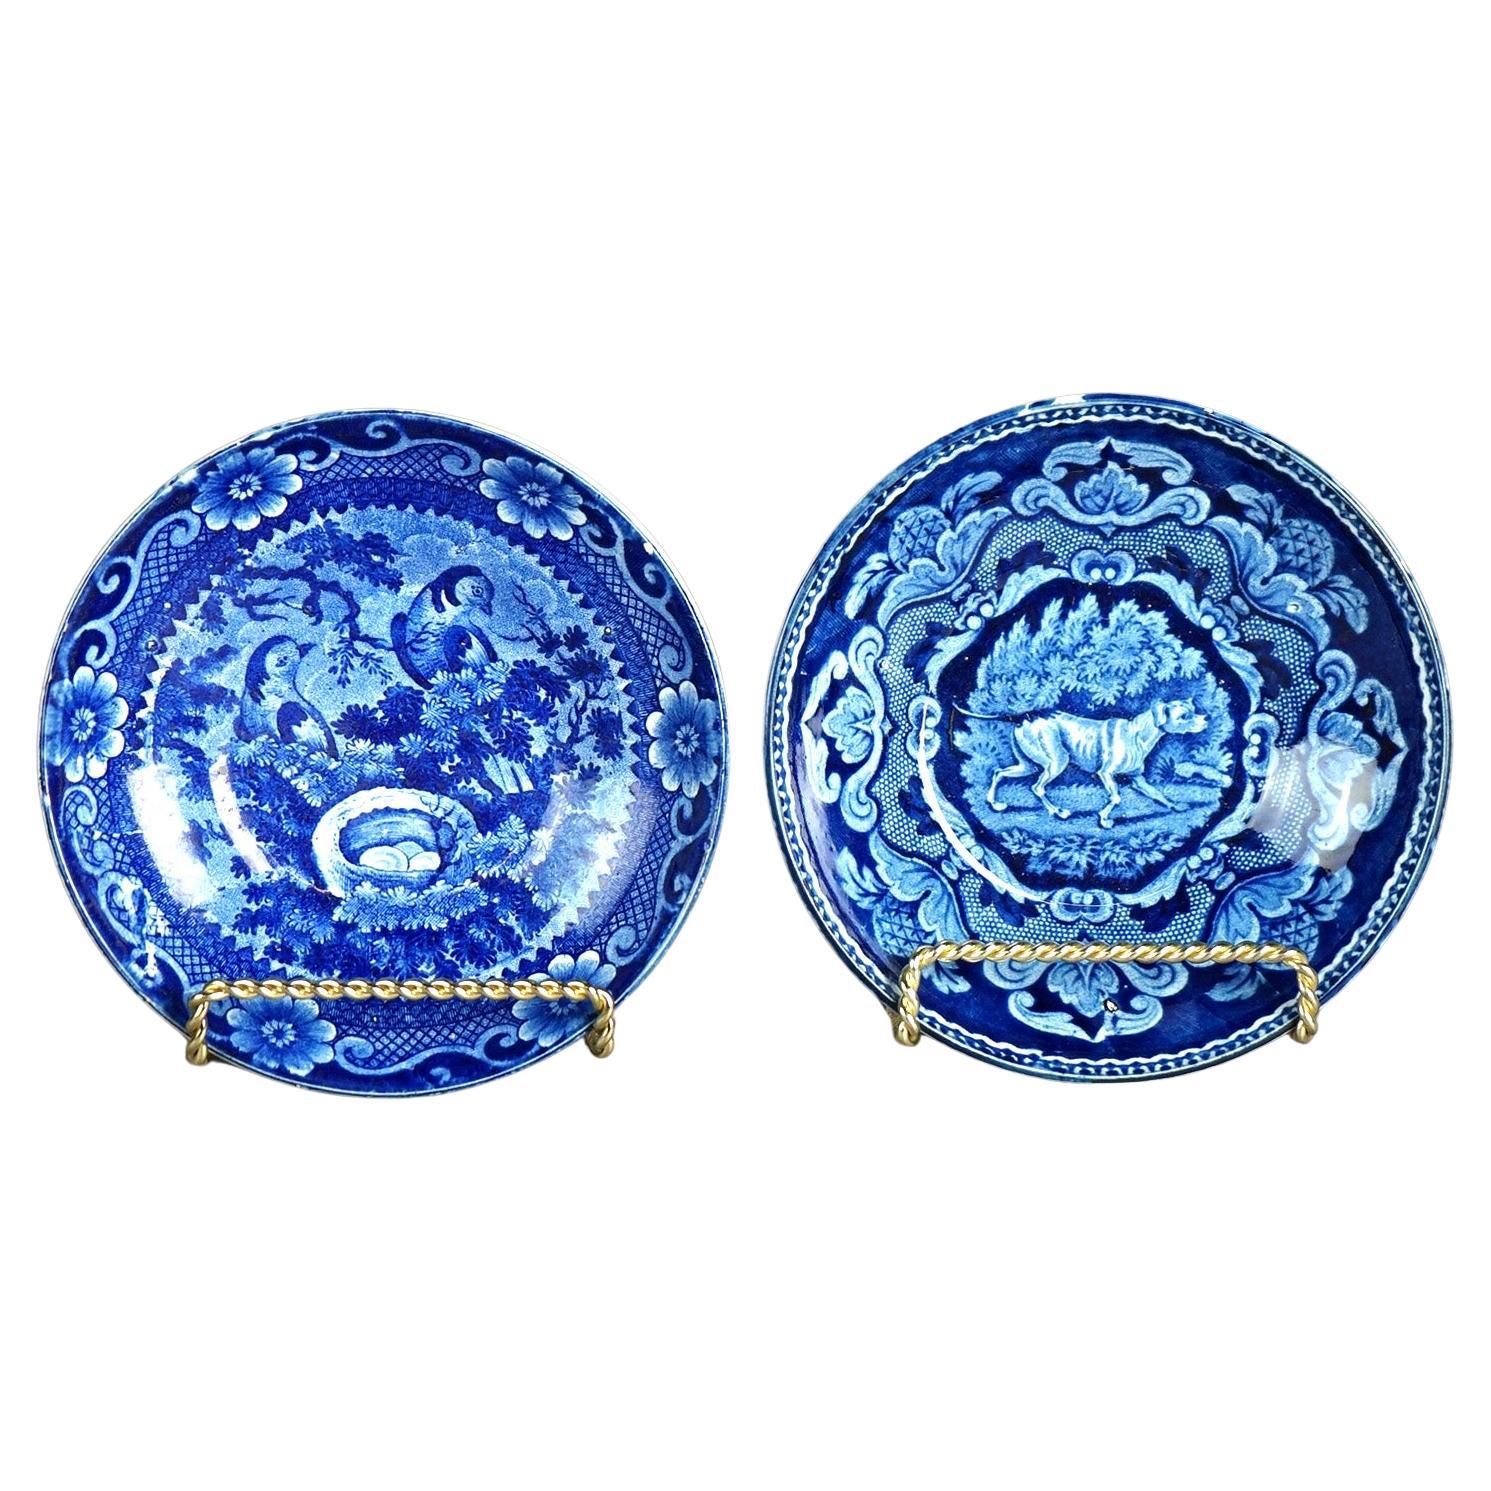 Two Antique Flow Blue Pottery Small Bowls with Dog & Birds, 19th C